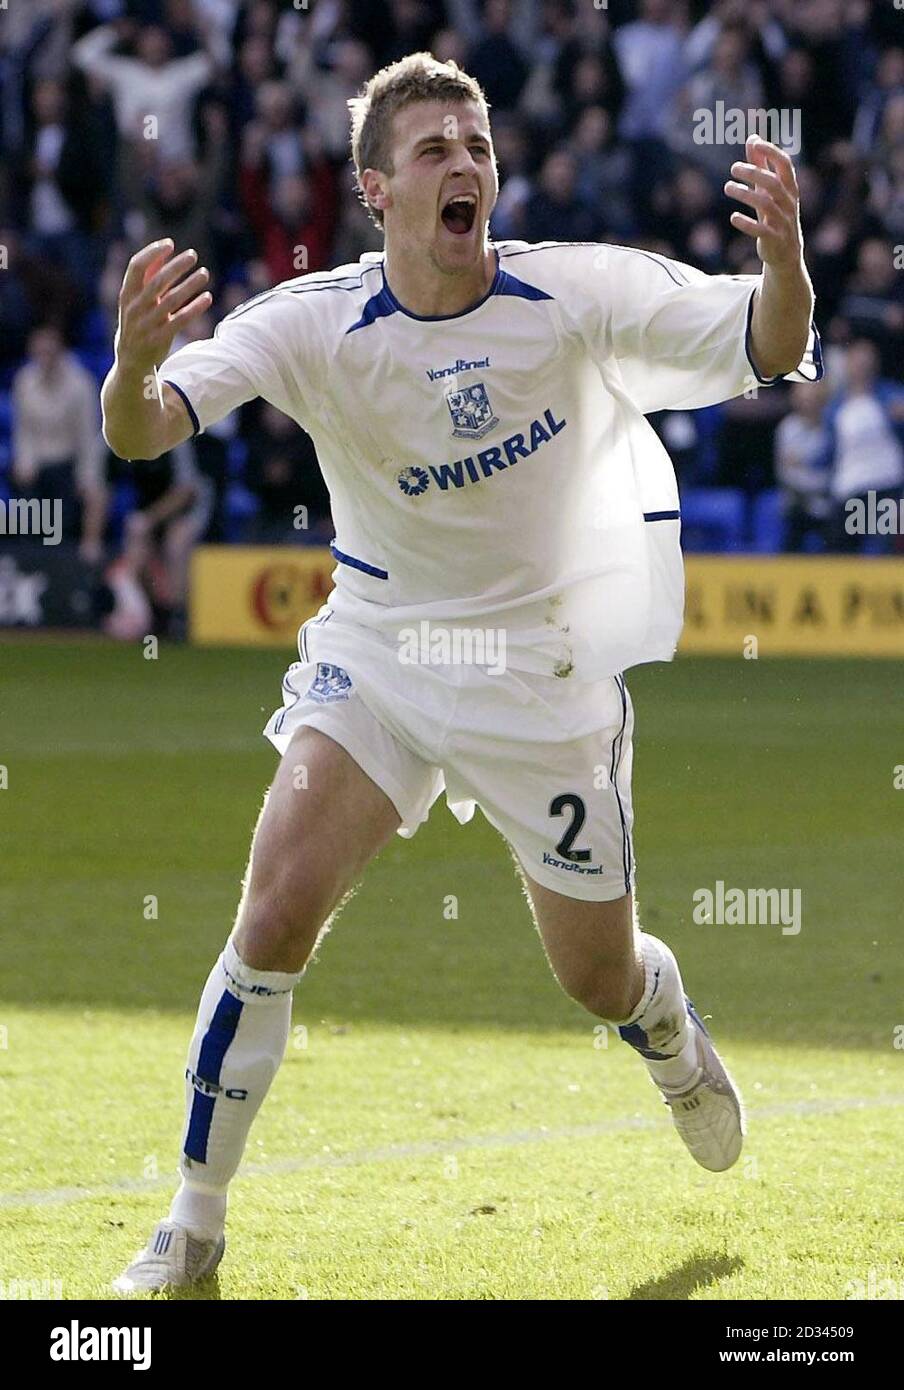 Tranmere Rovers' Ryan Taylor celebrates his goal against Luton Town during their Coca-Cola League One match at Prenton Park, Tranmere, Saturday October 2, 2004.   THIS PICTURE CAN ONLY BE USED WITHIN THE CONTEXT OF AN EDITORIAL FEATURE. NO UNOFFICIAL CLUB WEBSITE USE. Stock Photo